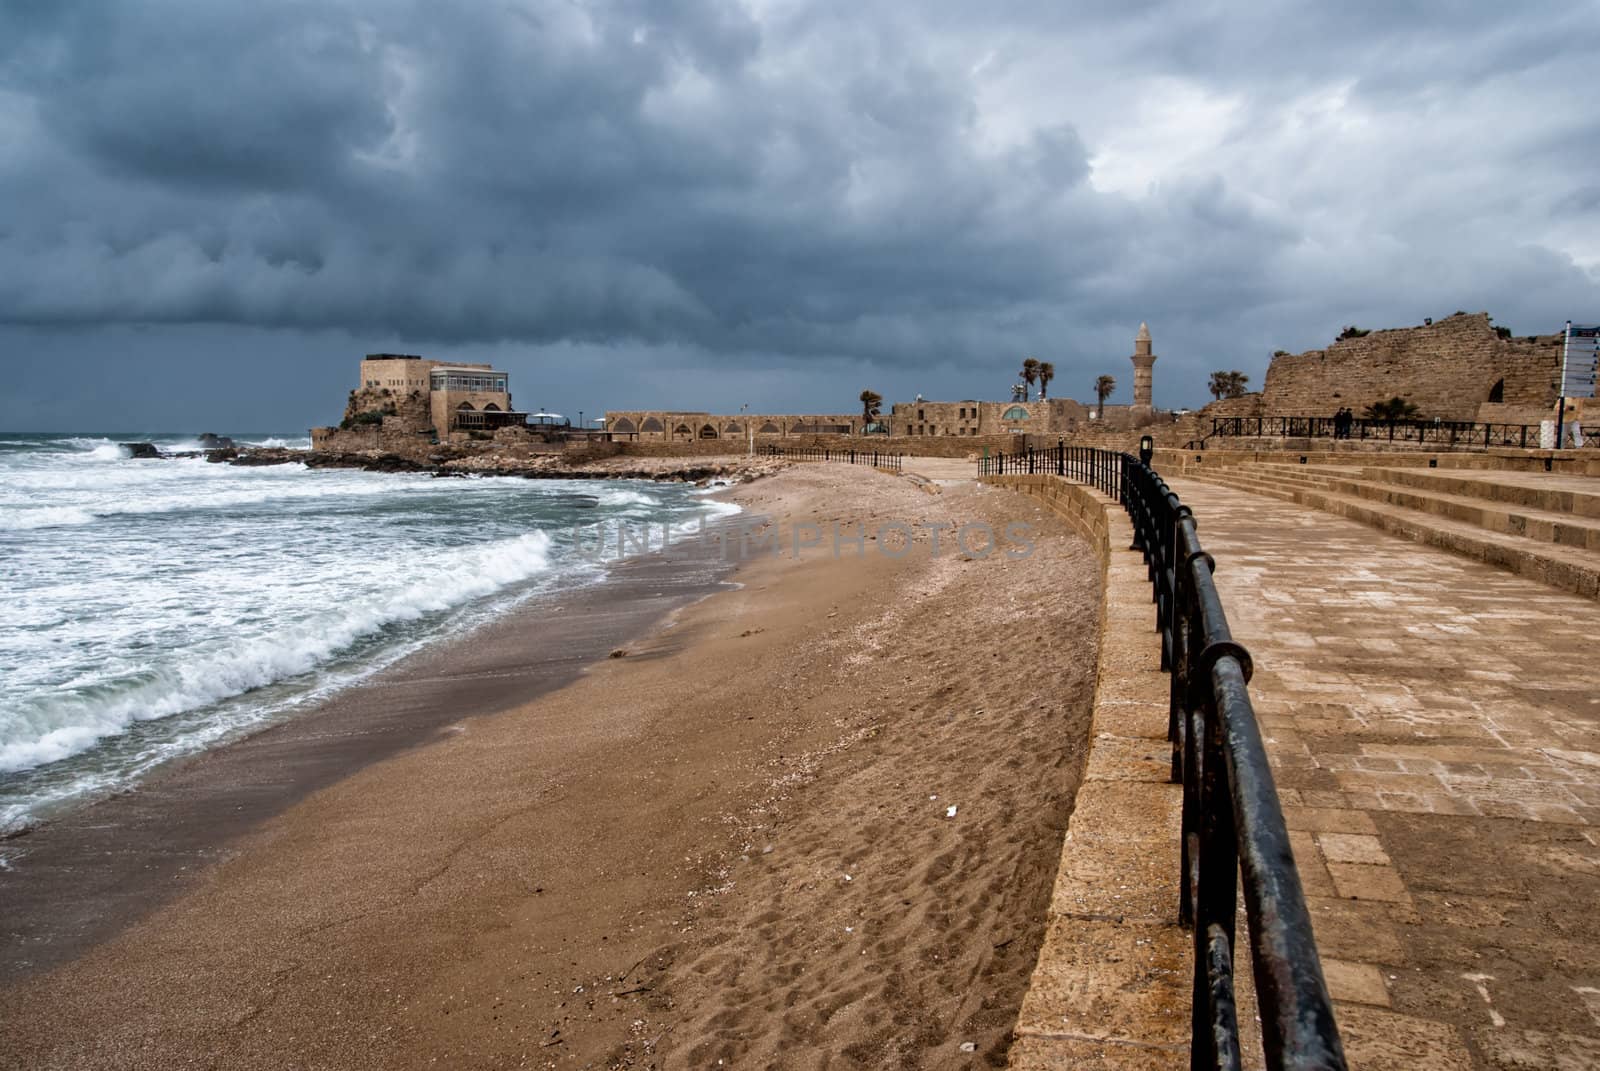 Ruins of harbor at Caesarea - ancient roman port in Israel by Zhukow